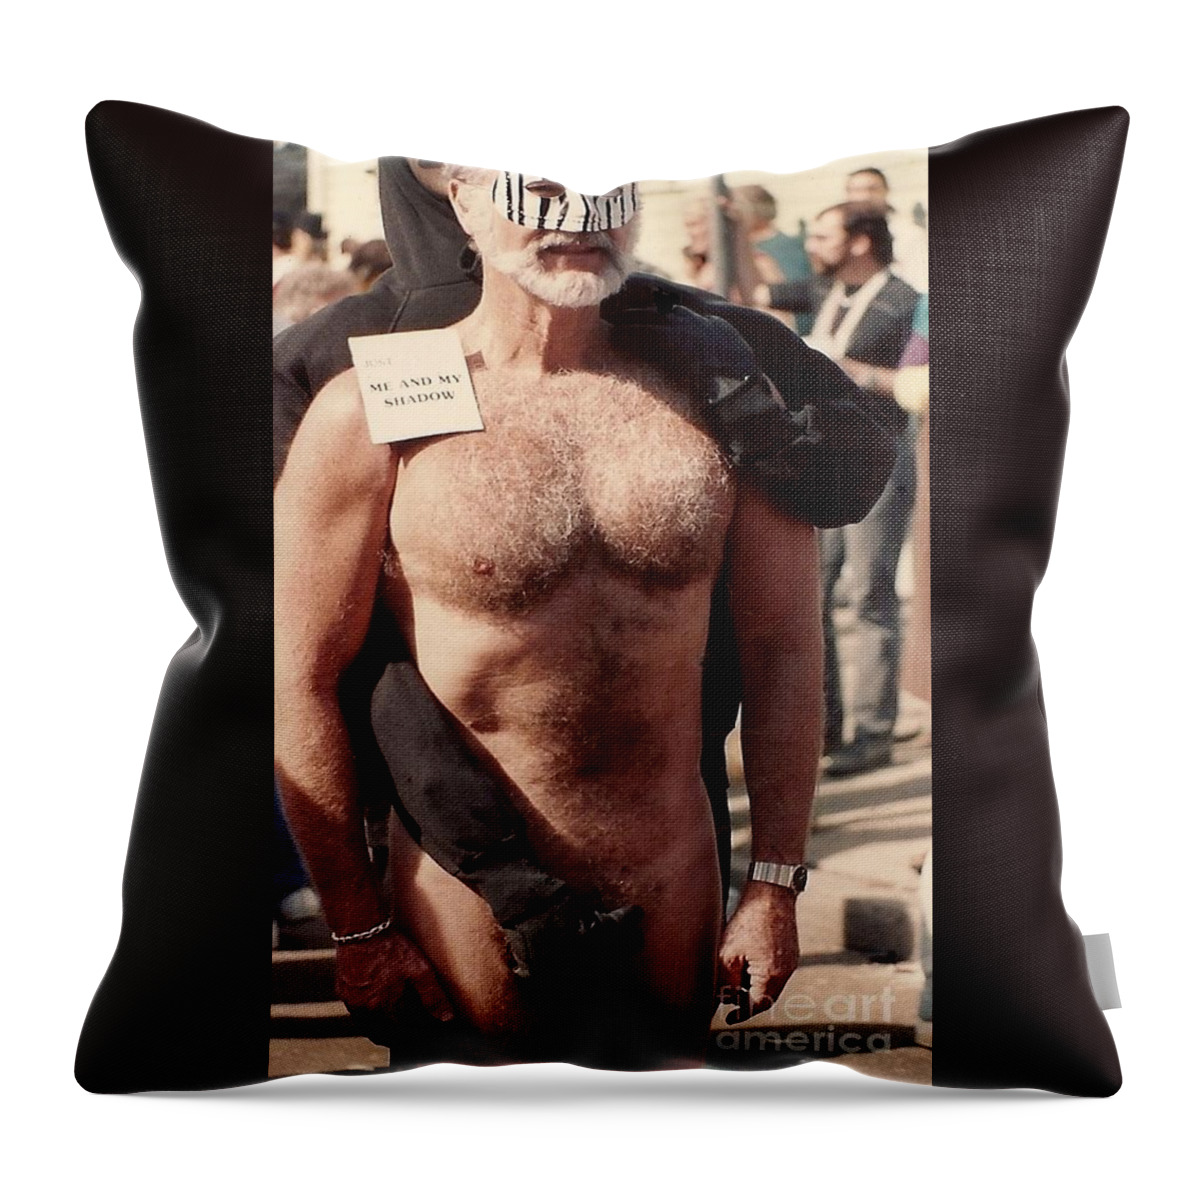 Nola Throw Pillow featuring the photograph New Orleans Just Me And My Shadow At The Mardi Gras In Louisiana by Michael Hoard